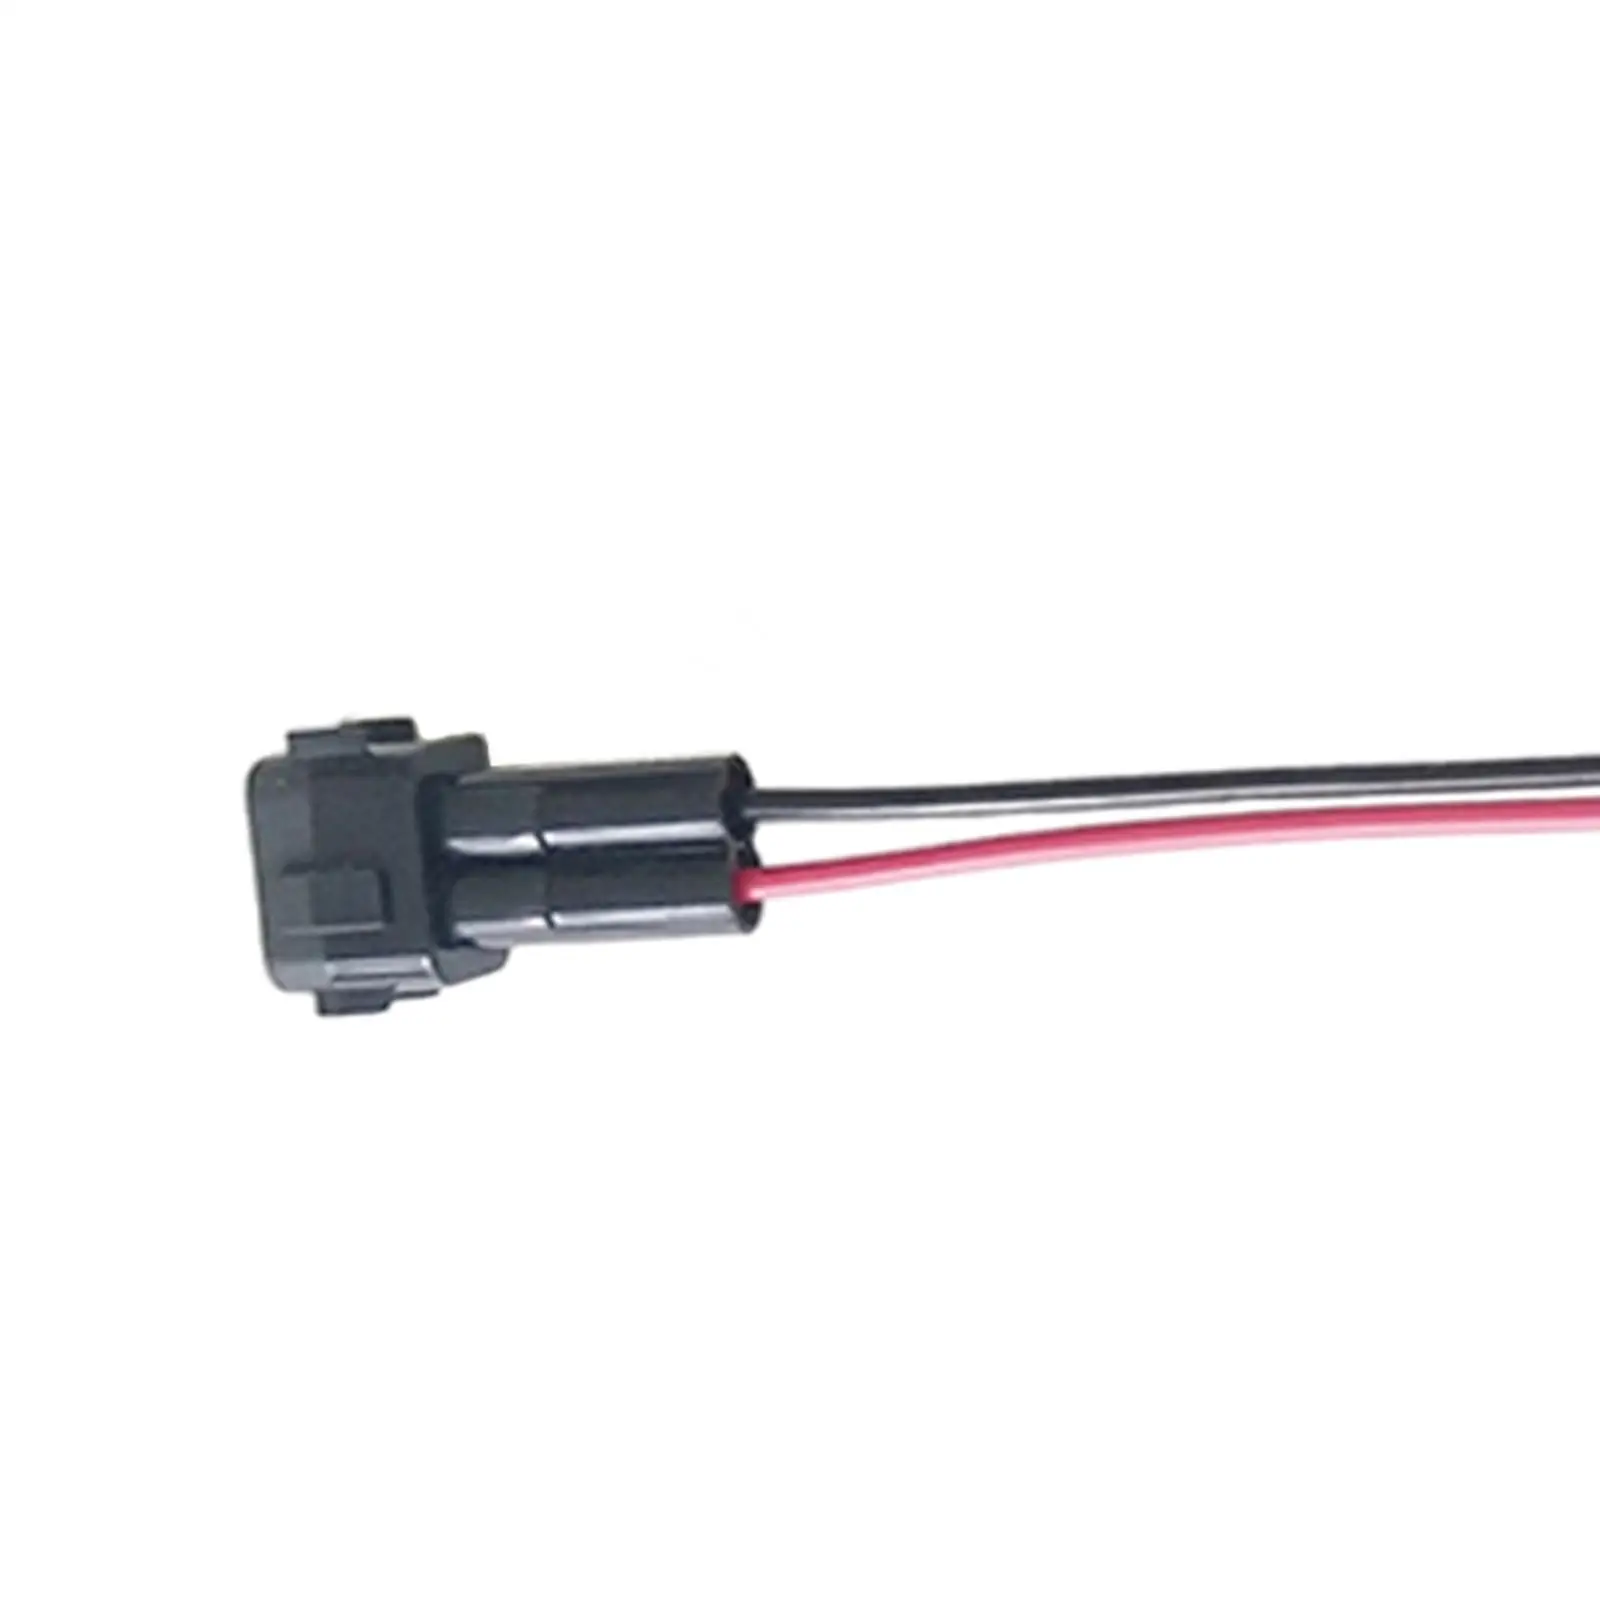 Fuel Adapter Harness(Female) to EV1(Male) Fit for B16